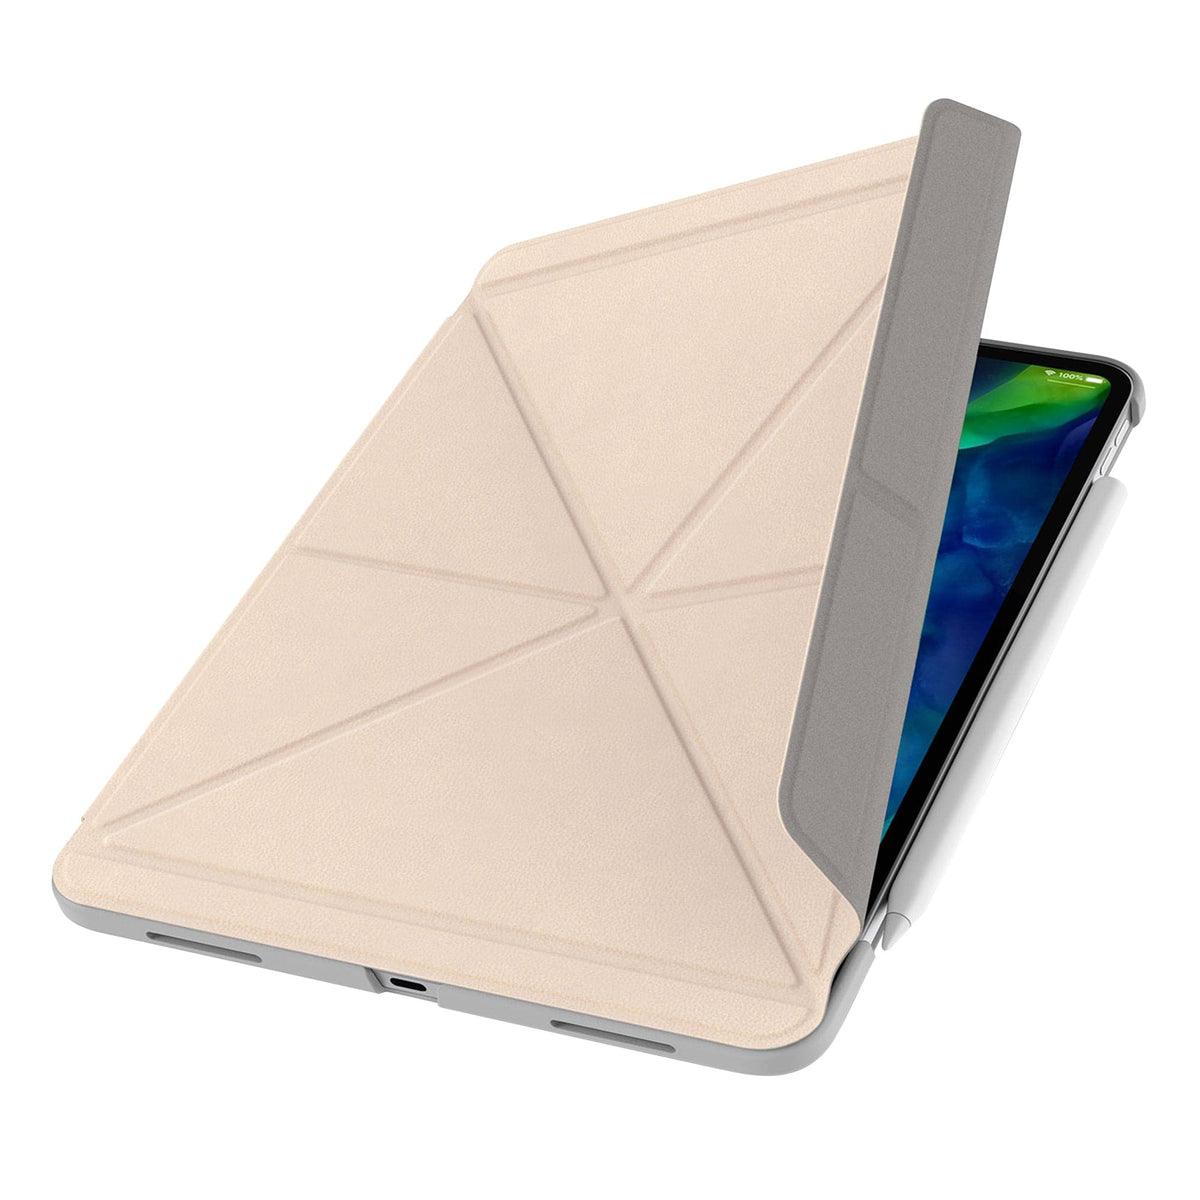 Moshi VersaCover Case with Folding Cover for 11" iPad Pro - 2nd Generation